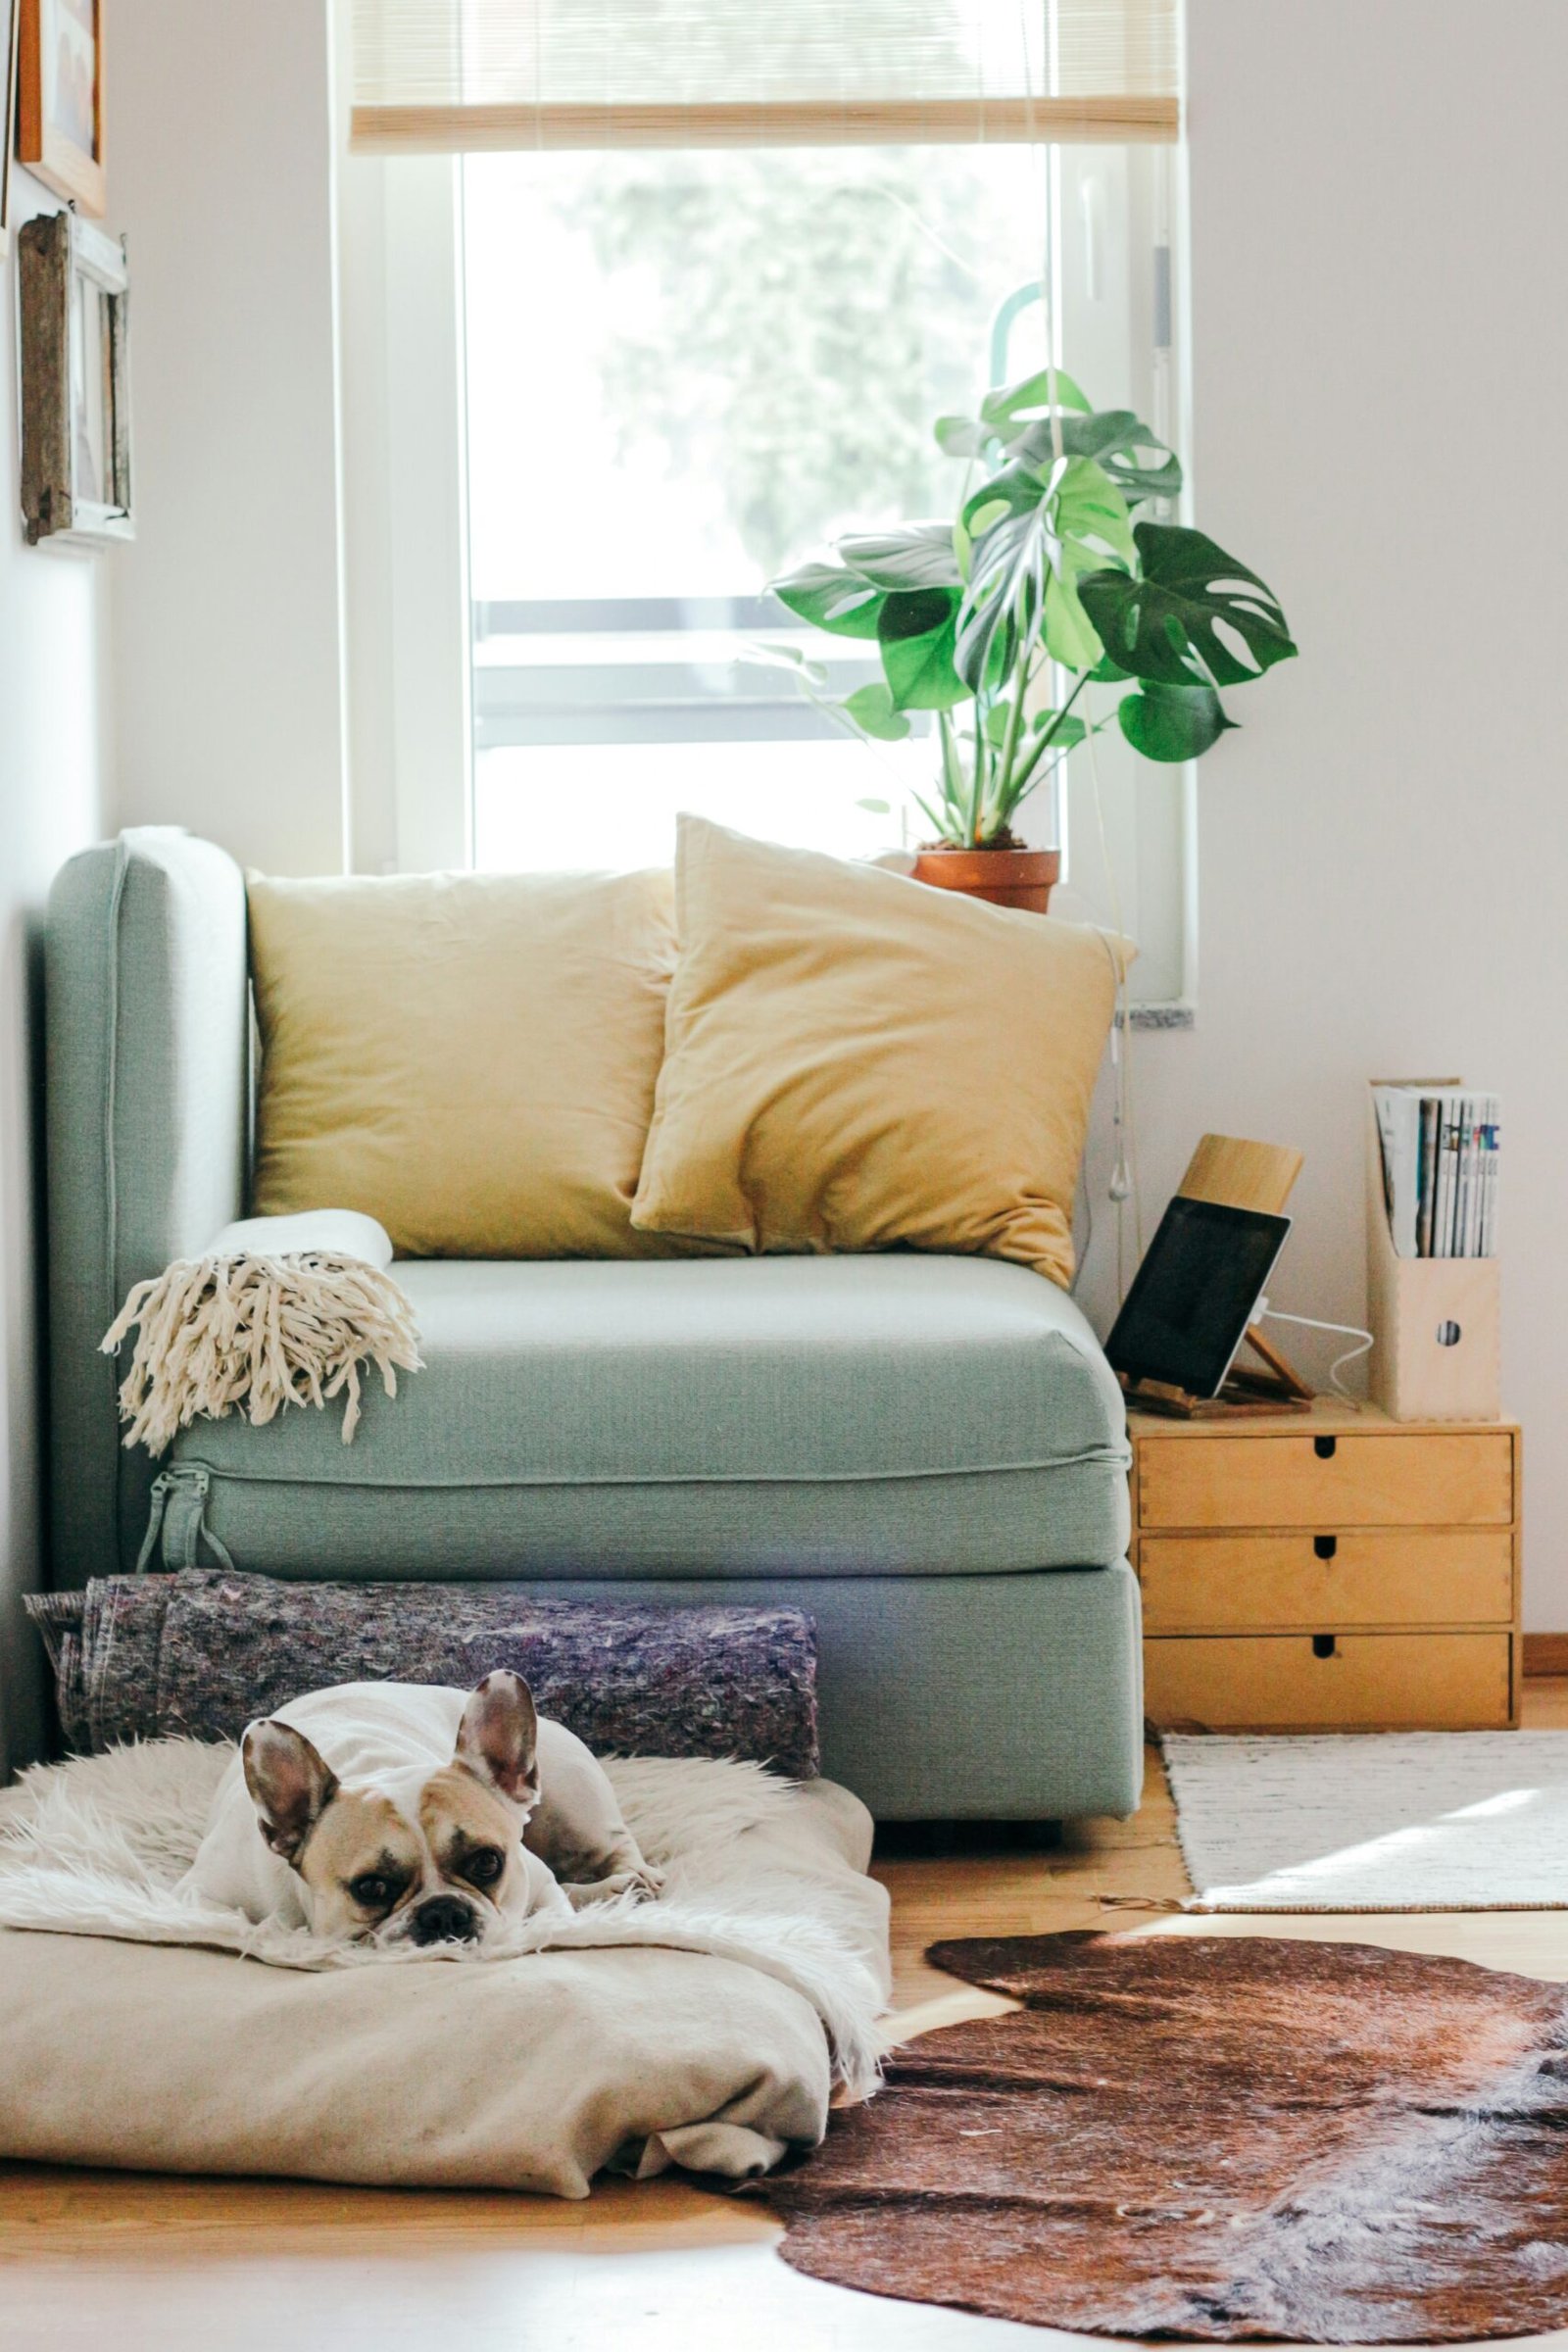 “From Drab to Fab: 5 Beginner-Friendly DIY Tips to Transform Your Home”